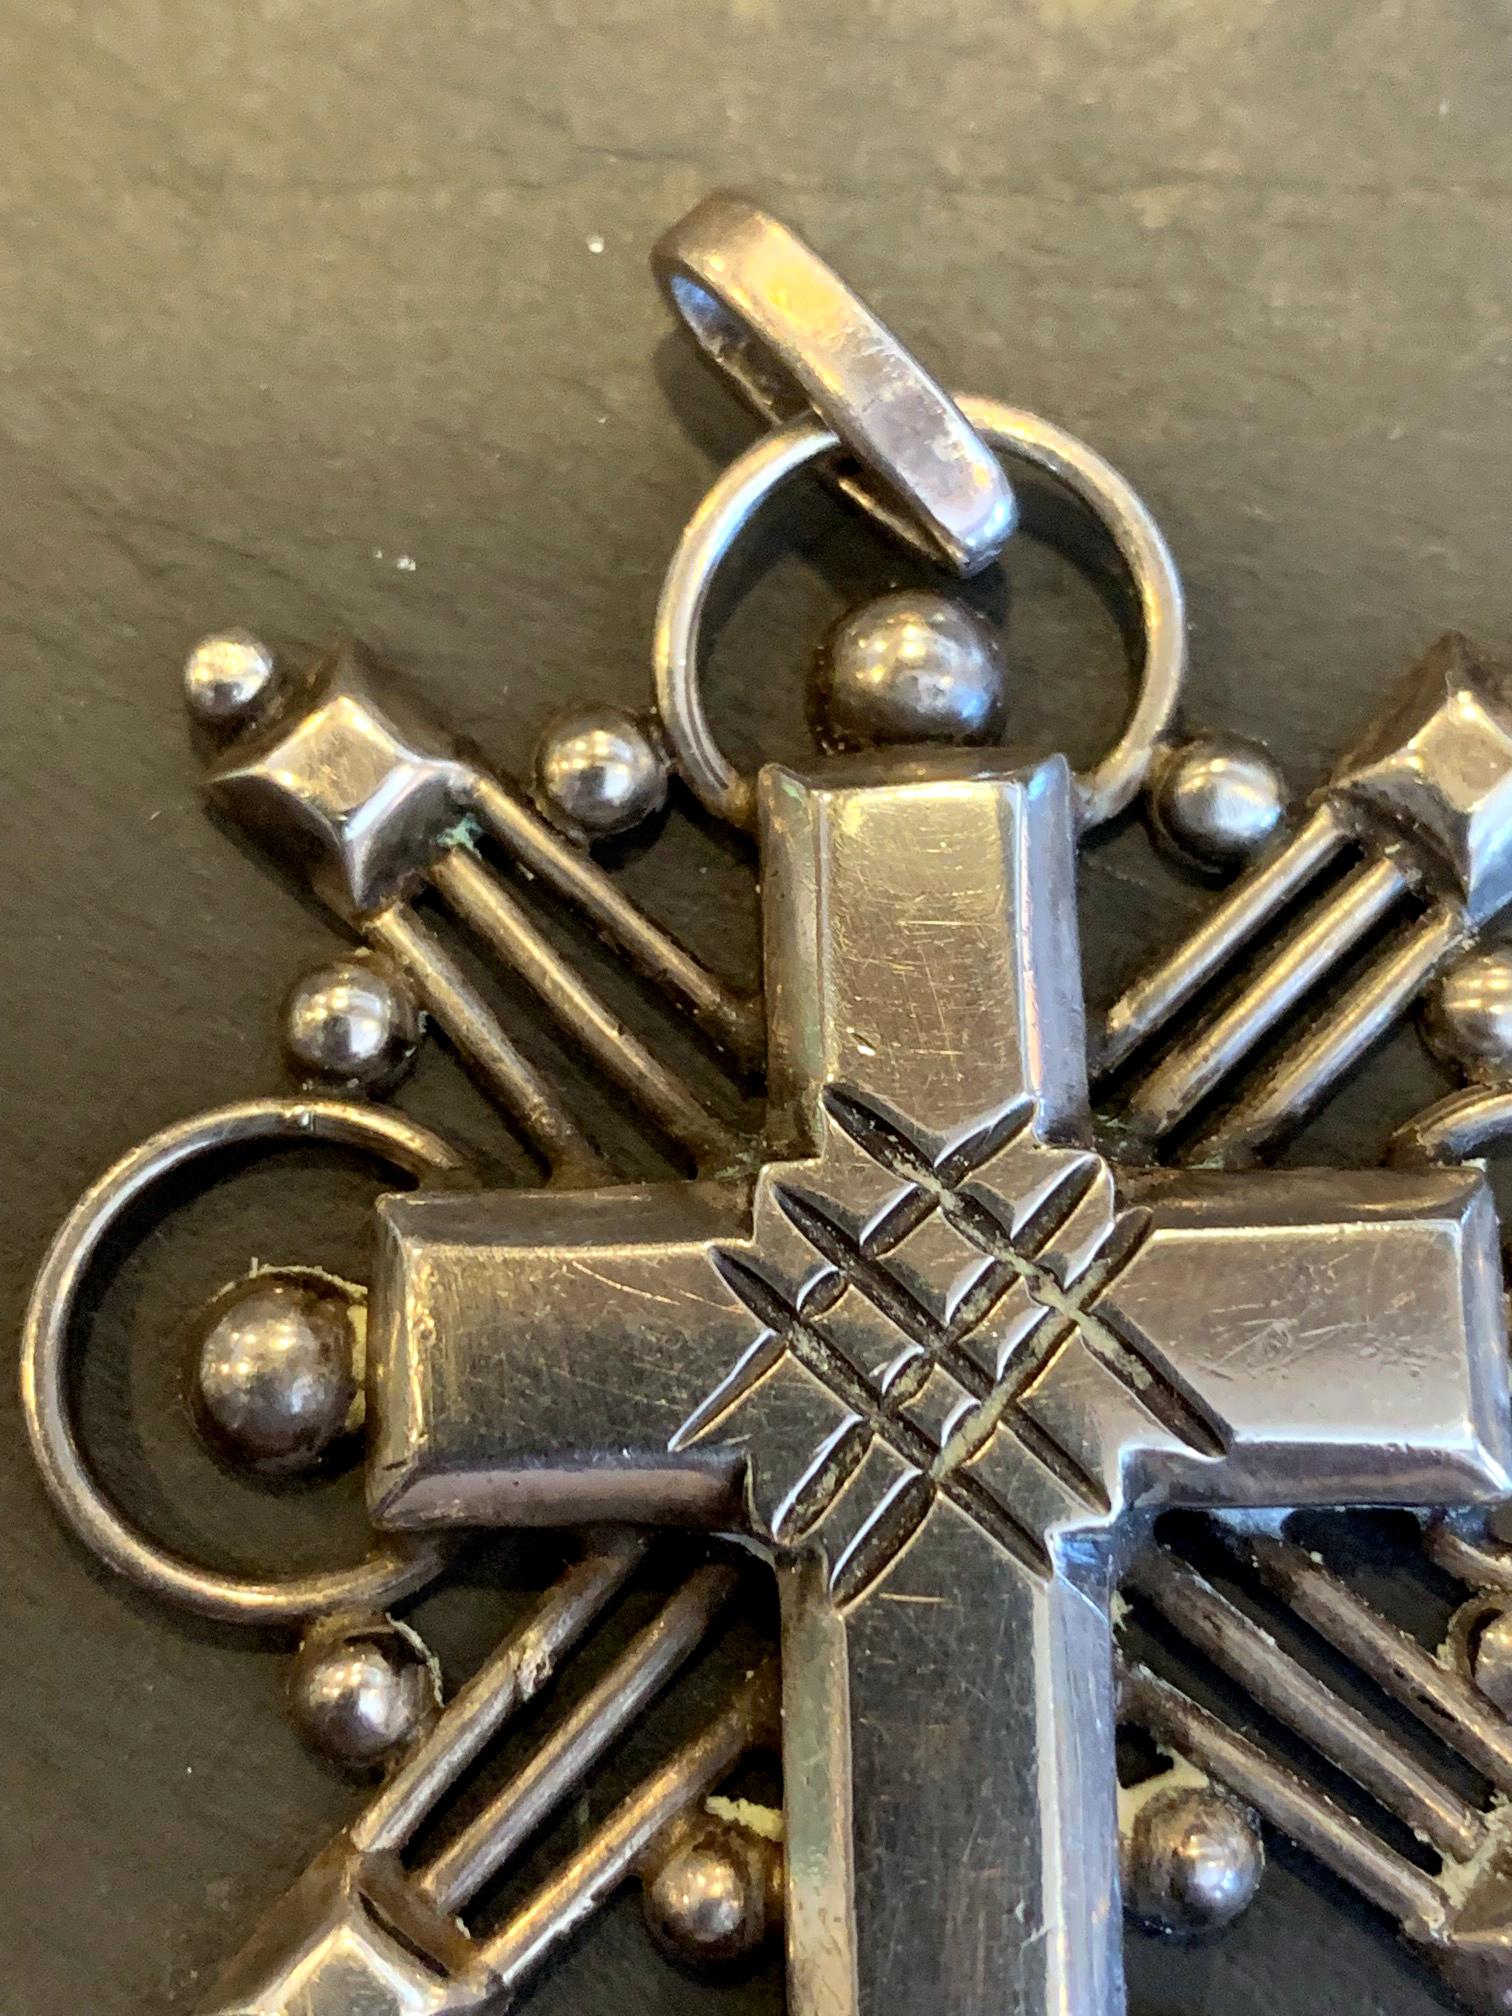 A lovely necklace pendant in 980 sterling silver from Taxco, Mexico. Designed and made by the studio of William Spratling, an American designer and entrepreneur who established his silver studio in Taxco in the 1930s. The cross design of this pedant